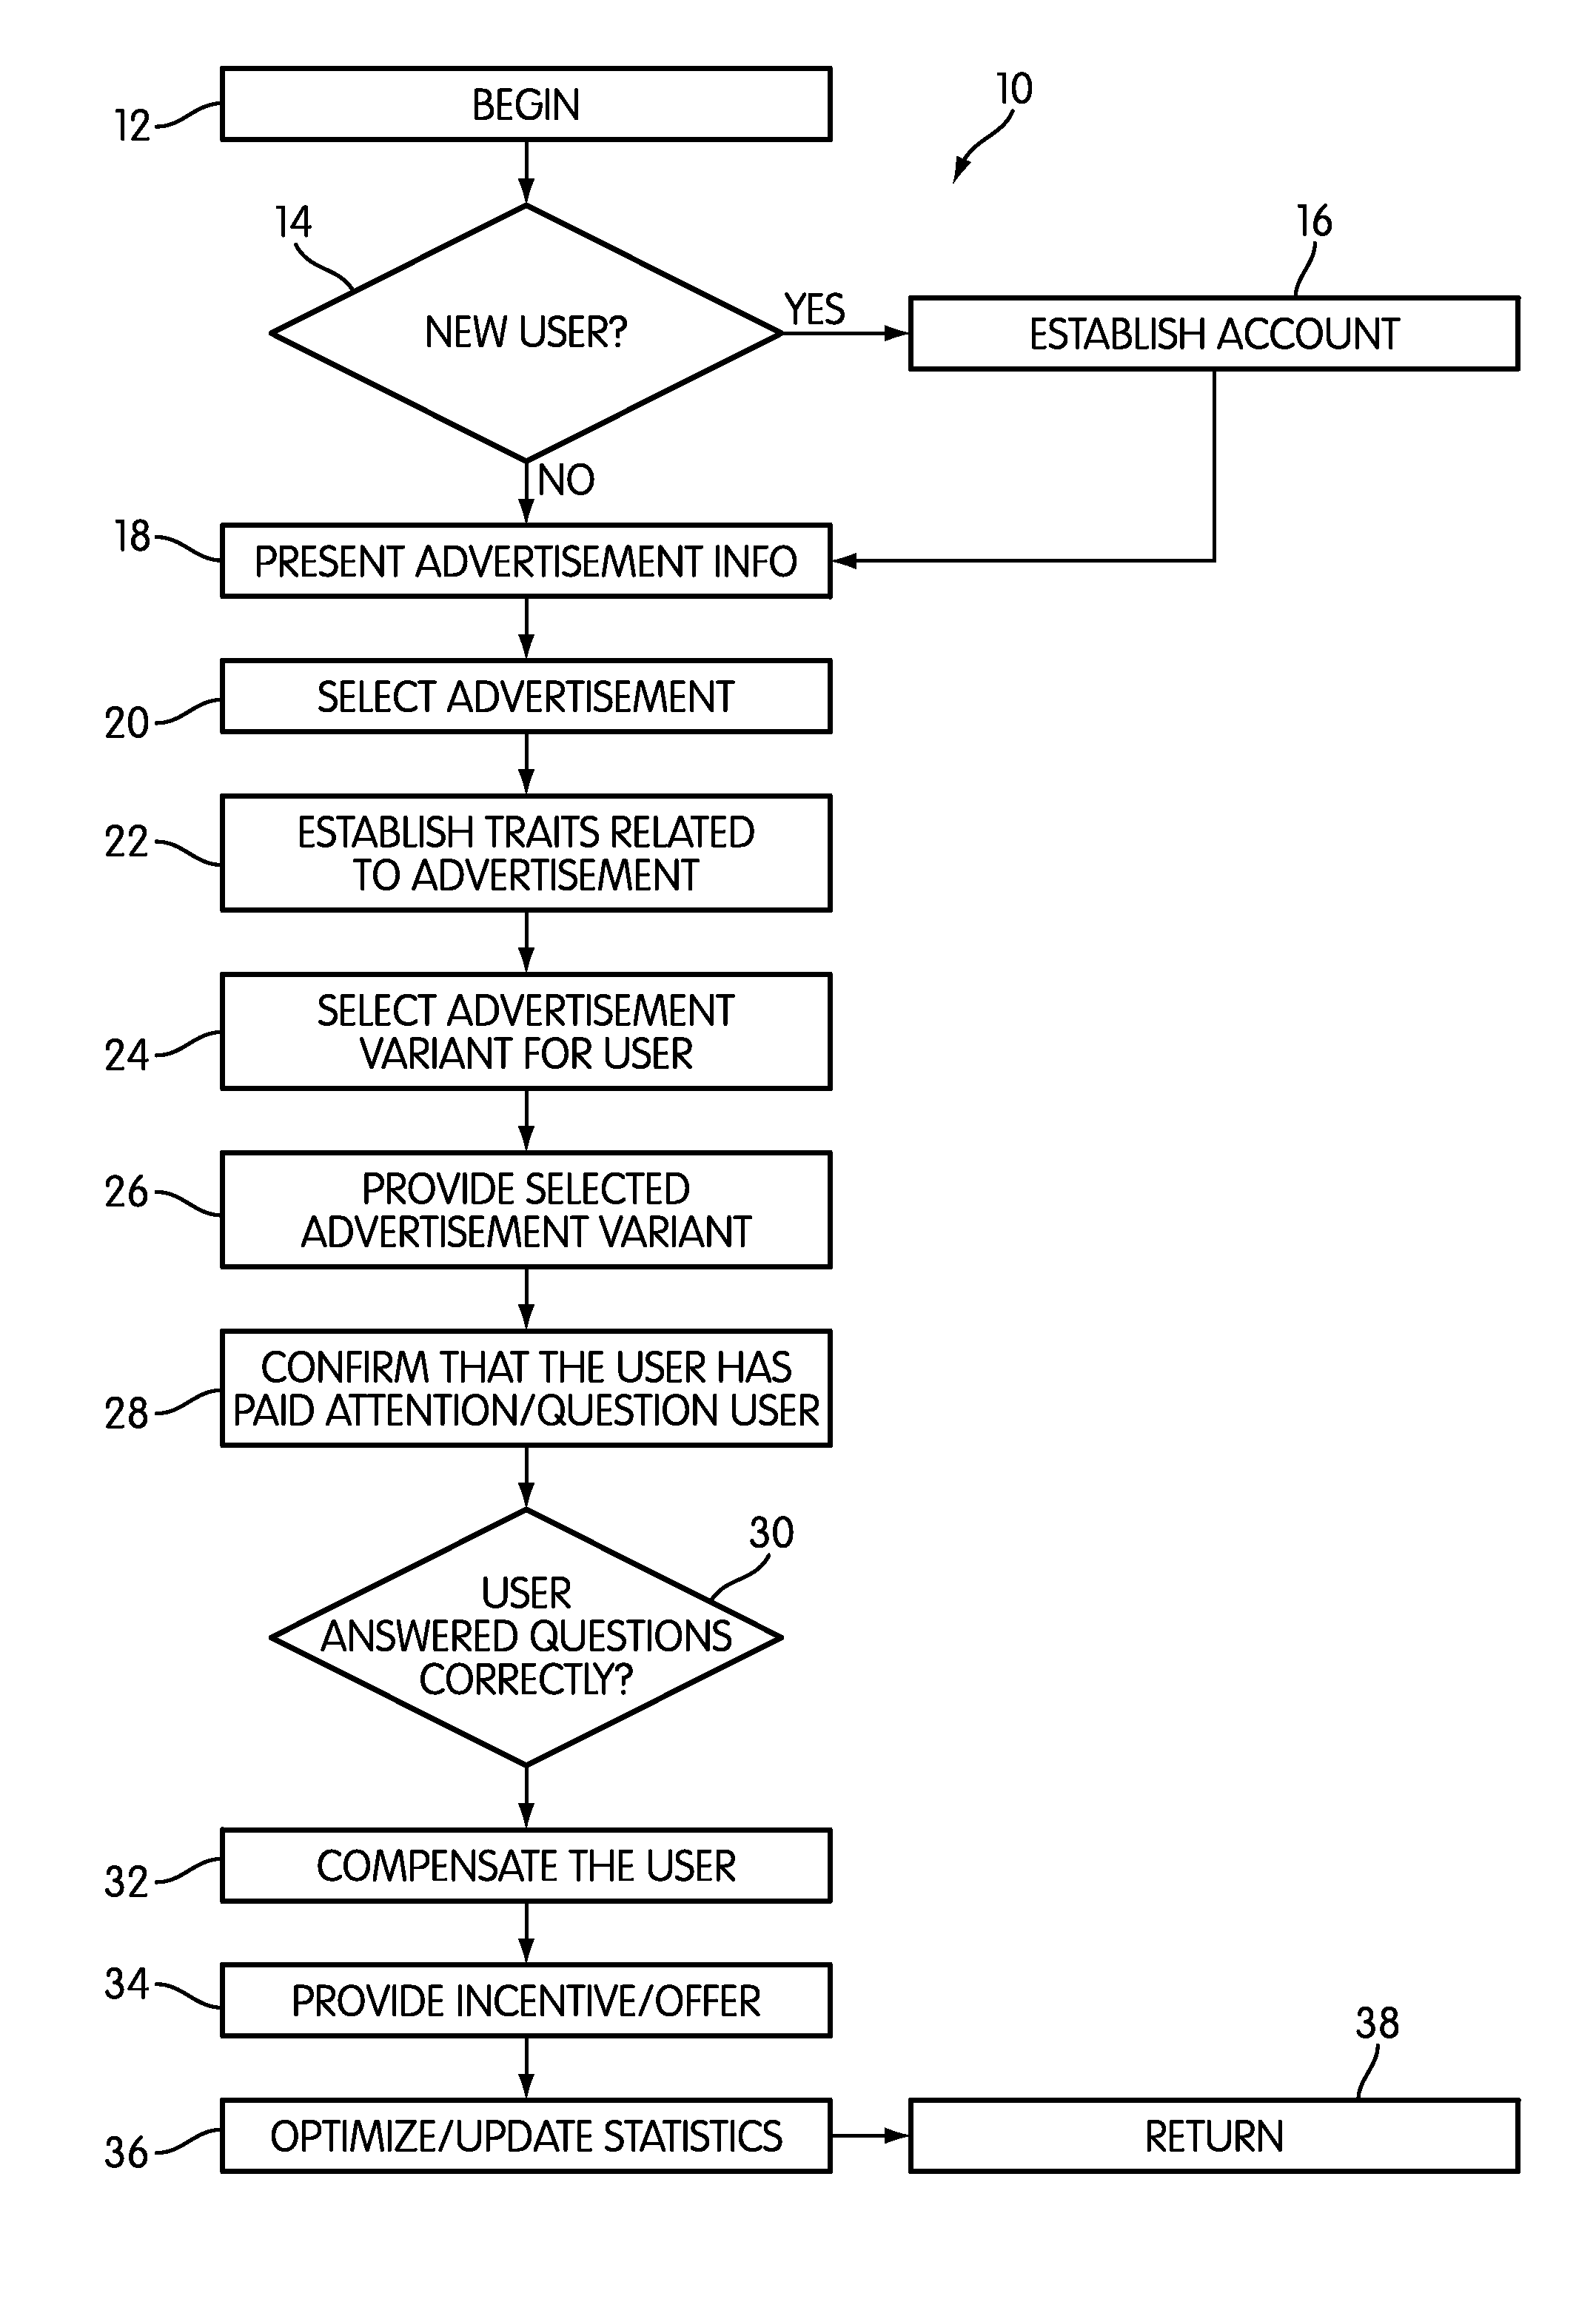 Methods of Influencing Buying Behavior with Directed Incentives and Compensation